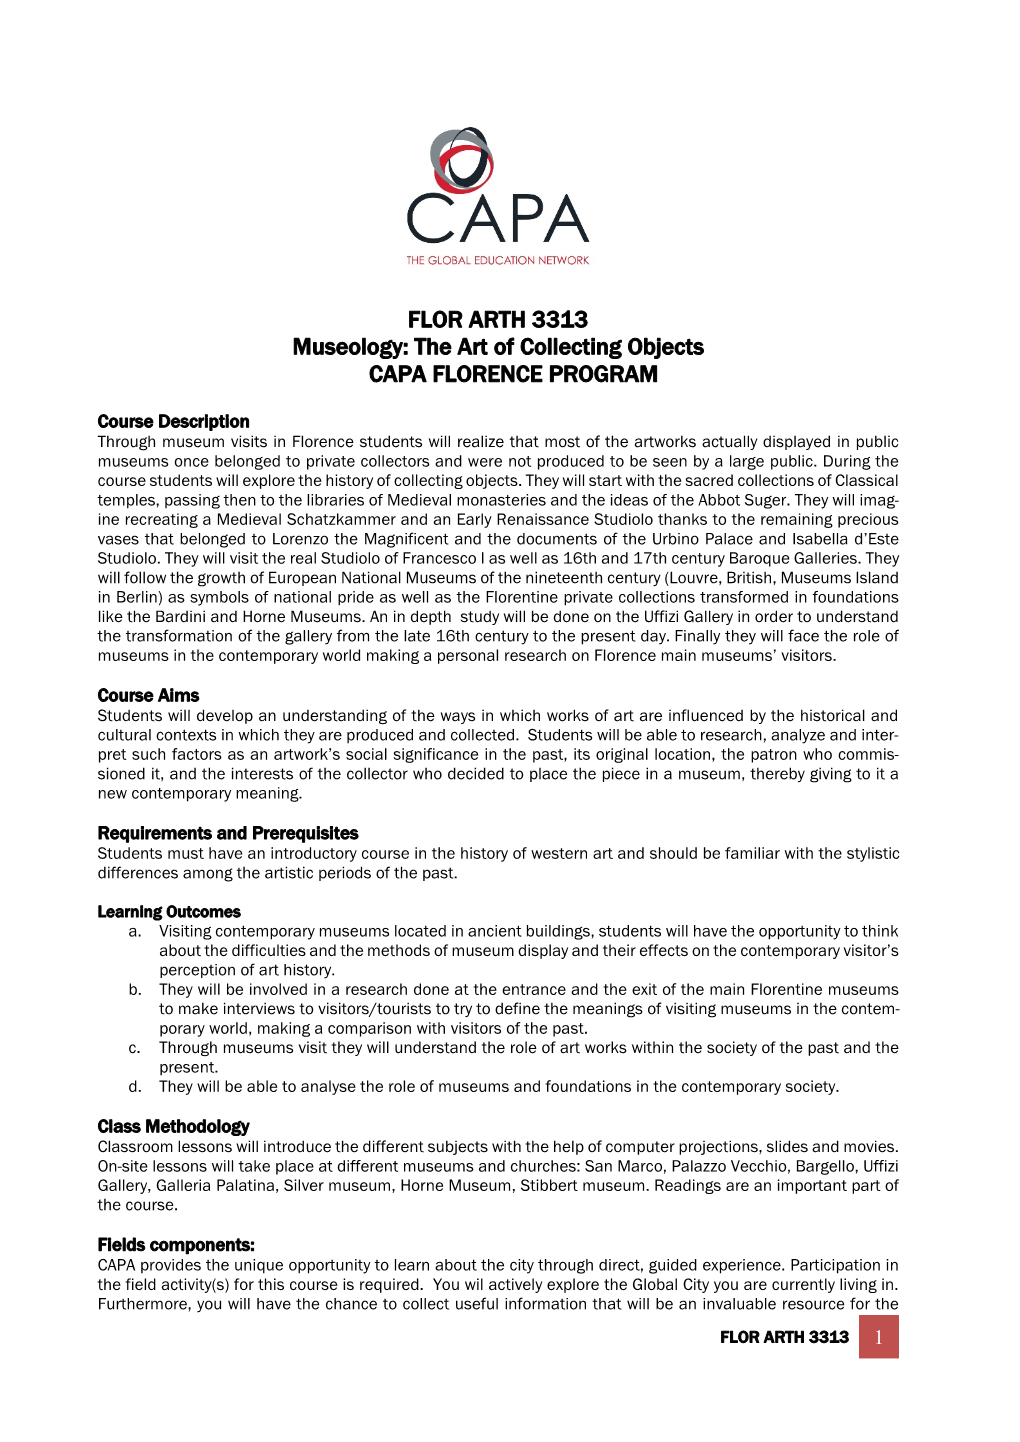 All CAPA Course Outline Or Syllabus Should Include the Following Items